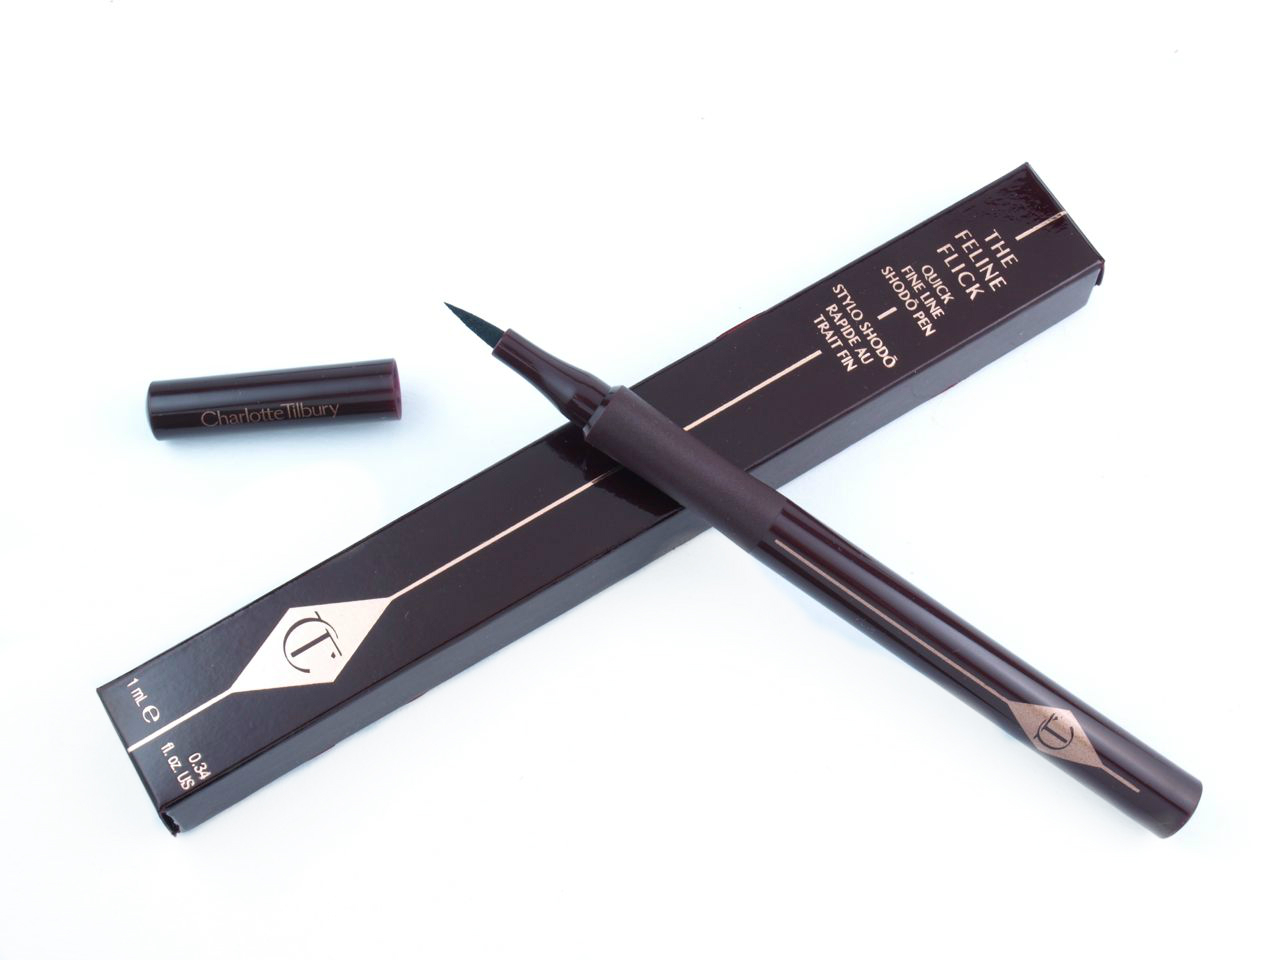 Tilbury The Feline Flick Liquid Eyeliner: Review and Swatches | The Happy Sloths: Beauty, Makeup, and Skincare Blog Reviews and Swatches